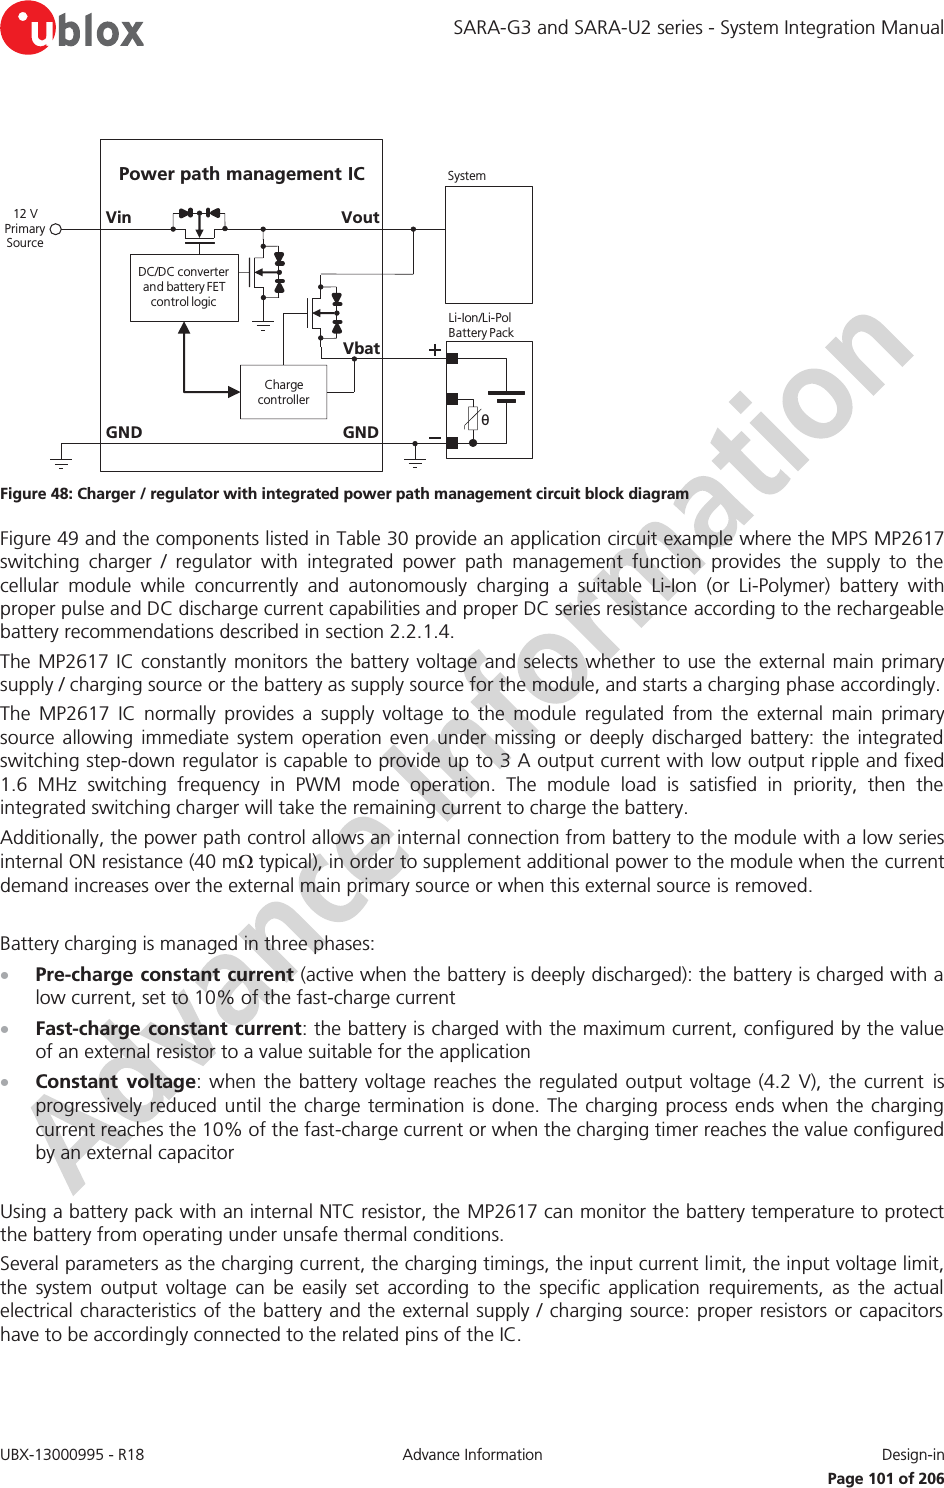 SARA-G3 and SARA-U2 series - System Integration Manual UBX-13000995 - R18  Advance Information  Design-in   Page 101 of 206  GNDPower path management ICVoutVinθLi-Ion/Li-Pol Battery PackGNDSystem12 V Primary SourceCharge controllerDC/DC converter and battery FET control logicVbat Figure 48: Charger / regulator with integrated power path management circuit block diagram Figure 49 and the components listed in Table 30 provide an application circuit example where the MPS MP2617 switching charger / regulator with integrated power path management function provides the supply to the cellular module while concurrently and autonomously charging a suitable Li-Ion (or Li-Polymer) battery with proper pulse and DC discharge current capabilities and proper DC series resistance according to the rechargeable battery recommendations described in section 2.2.1.4. The MP2617 IC constantly monitors the battery voltage and selects whether to use the external main primary supply / charging source or the battery as supply source for the module, and starts a charging phase accordingly.  The MP2617 IC normally provides a supply voltage to the module regulated from the external main primary source allowing immediate system operation even under missing or deeply discharged battery: the integrated switching step-down regulator is capable to provide up to 3 A output current with low output ripple and fixed 1.6 MHz switching frequency in PWM mode operation. The module load is satisfied in priority, then the integrated switching charger will take the remaining current to charge the battery. Additionally, the power path control allows an internal connection from battery to the module with a low series internal ON resistance (40 m: typical), in order to supplement additional power to the module when the current demand increases over the external main primary source or when this external source is removed.  Battery charging is managed in three phases: x Pre-charge constant current (active when the battery is deeply discharged): the battery is charged with a low current, set to 10% of the fast-charge current x Fast-charge constant current: the battery is charged with the maximum current, configured by the value of an external resistor to a value suitable for the application x Constant voltage: when the battery voltage reaches the regulated output voltage (4.2 V), the current is progressively reduced until the charge termination is done. The charging process ends when the charging current reaches the 10% of the fast-charge current or when the charging timer reaches the value configured by an external capacitor  Using a battery pack with an internal NTC resistor, the MP2617 can monitor the battery temperature to protect the battery from operating under unsafe thermal conditions. Several parameters as the charging current, the charging timings, the input current limit, the input voltage limit, the system output voltage can be easily set according to the specific application requirements, as the actual electrical characteristics of the battery and the external supply / charging source: proper resistors or capacitors have to be accordingly connected to the related pins of the IC.  